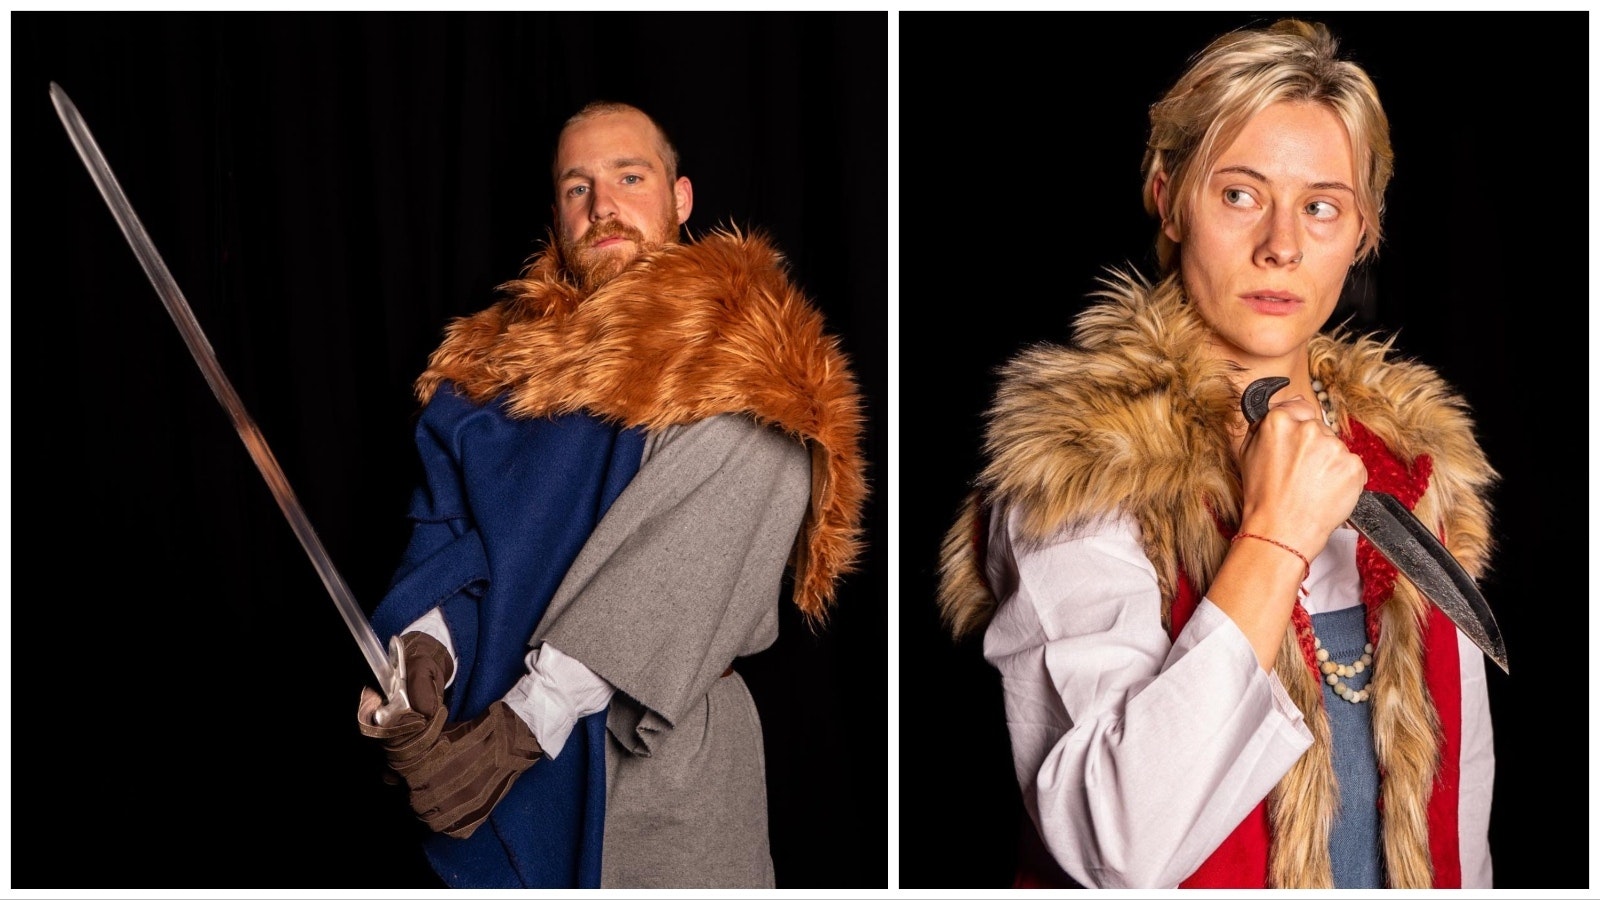 Actors Mason Marshall and Rose Linville in publicity photos for "Saga: A New Nordic Musical."